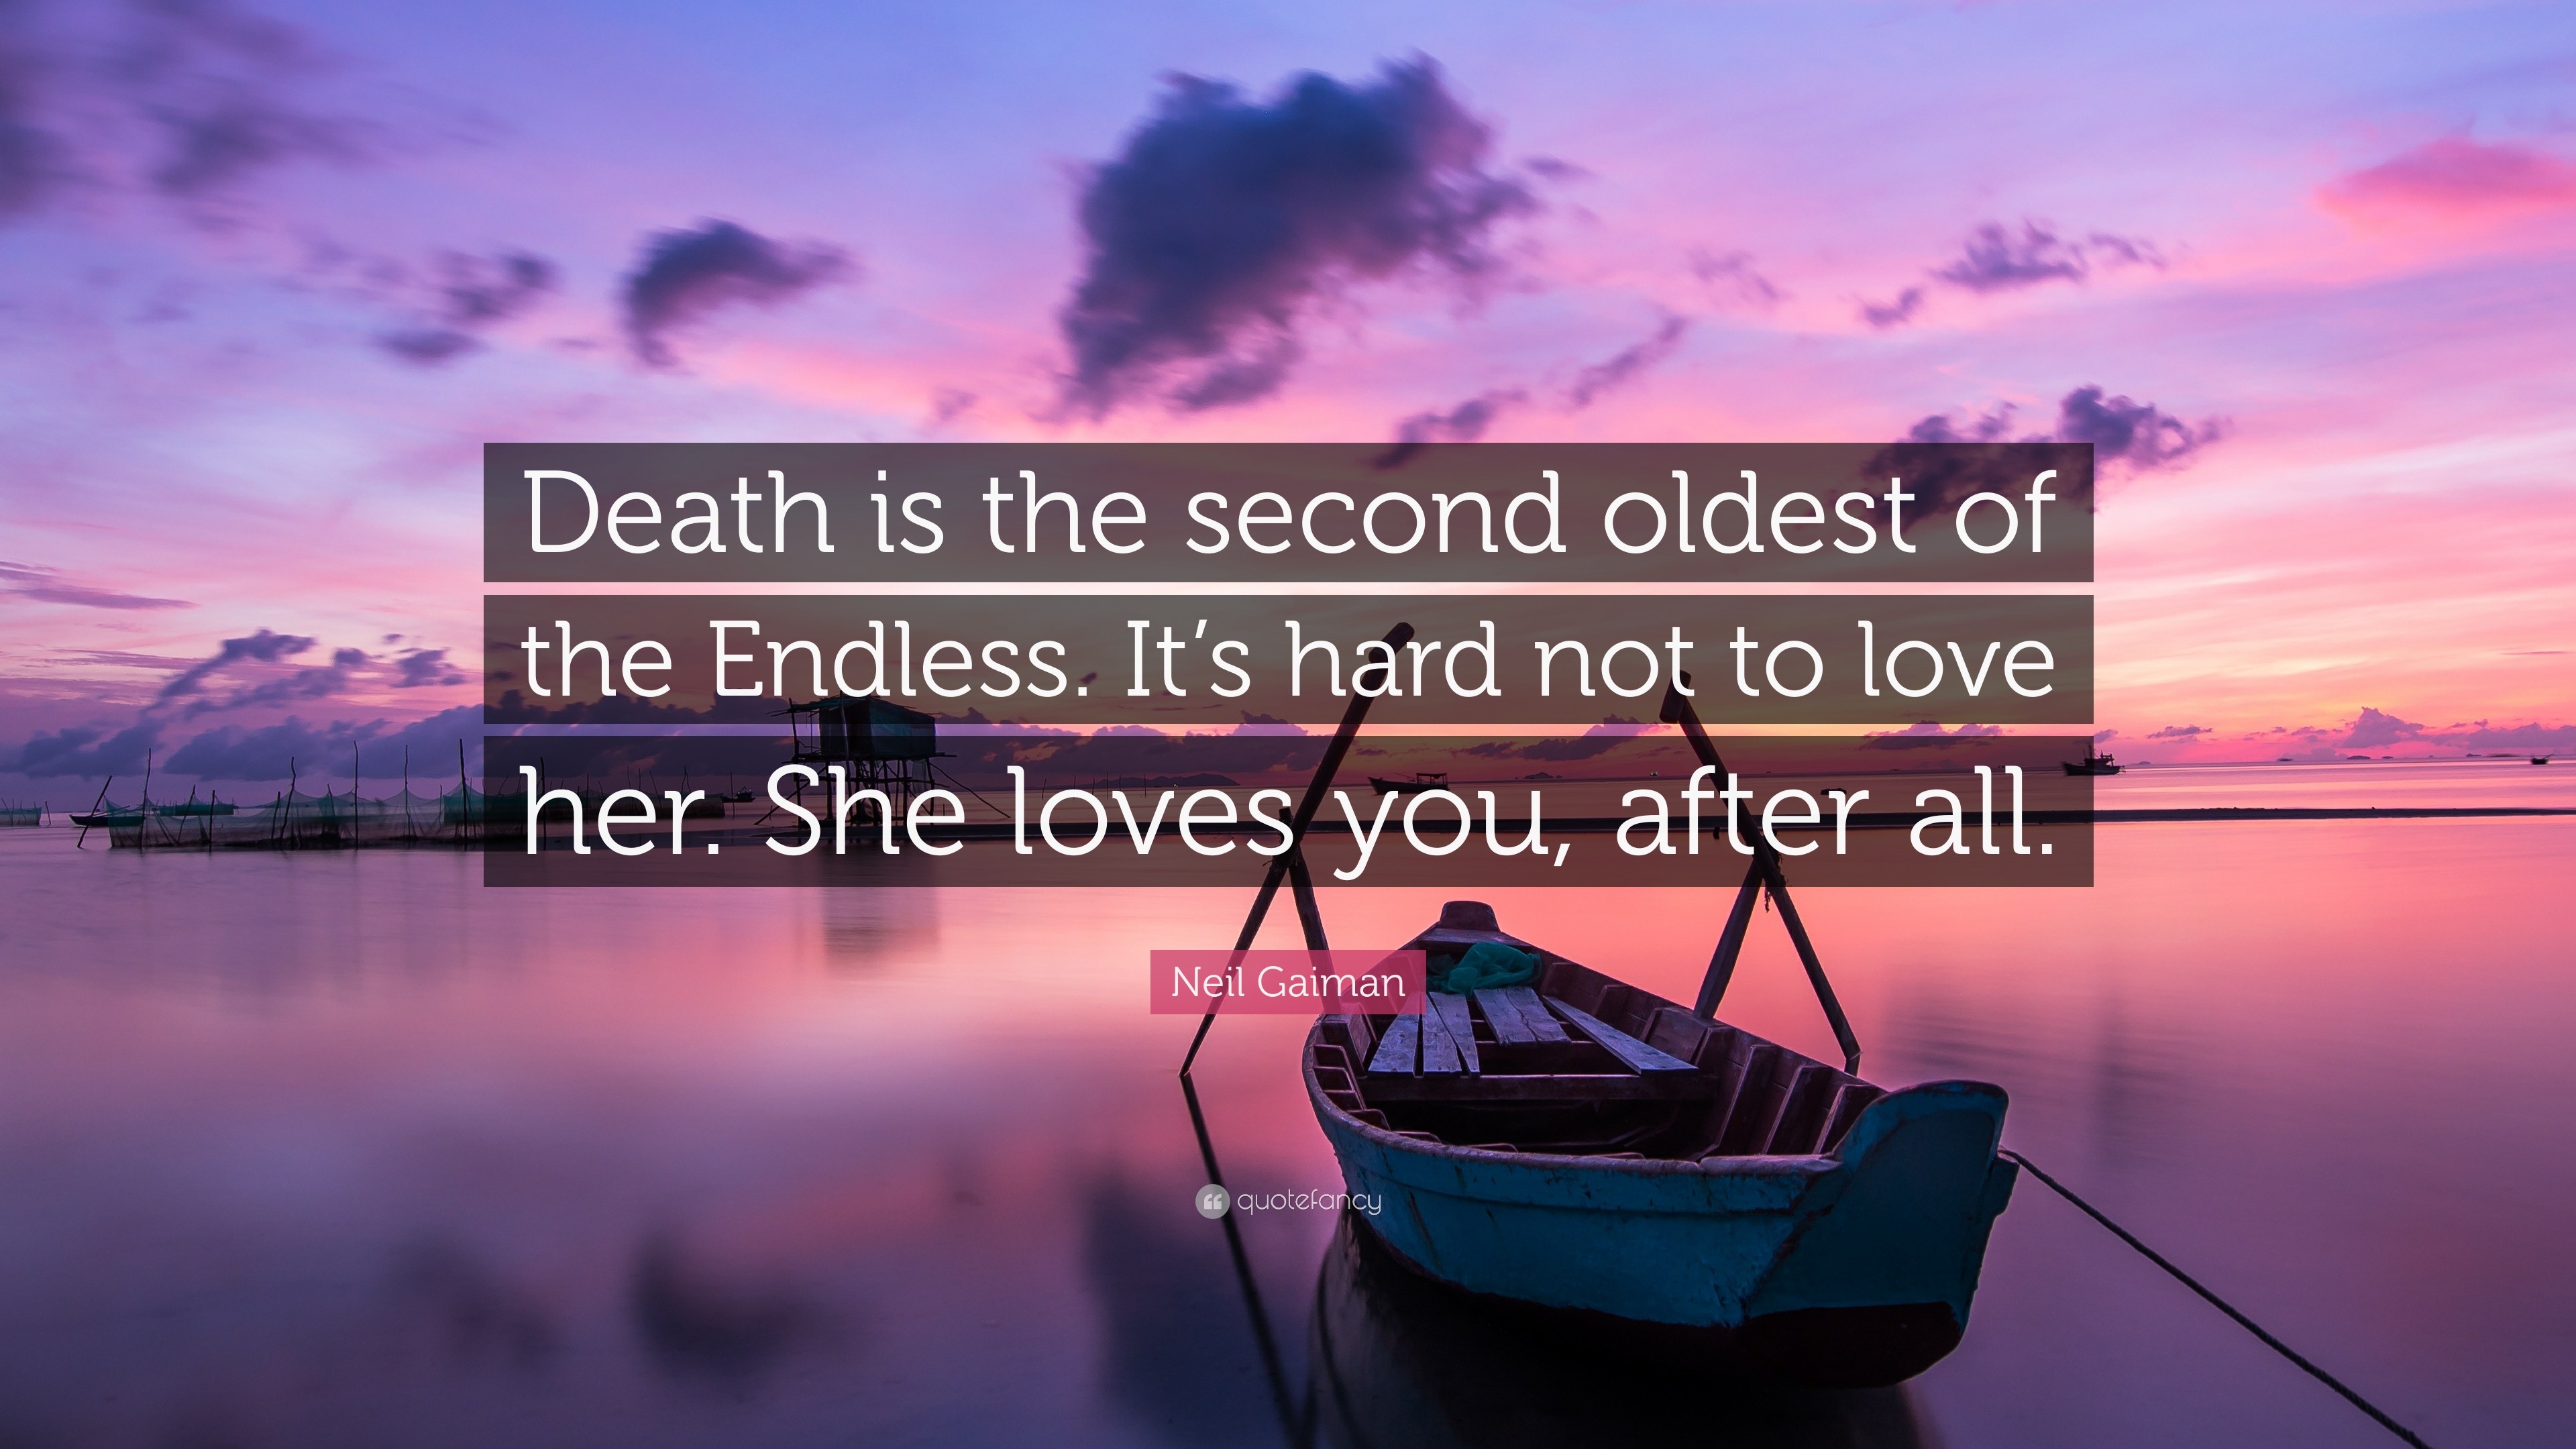 Neil Gaiman Quote: “Death is the second oldest of the Endless. It’s ...